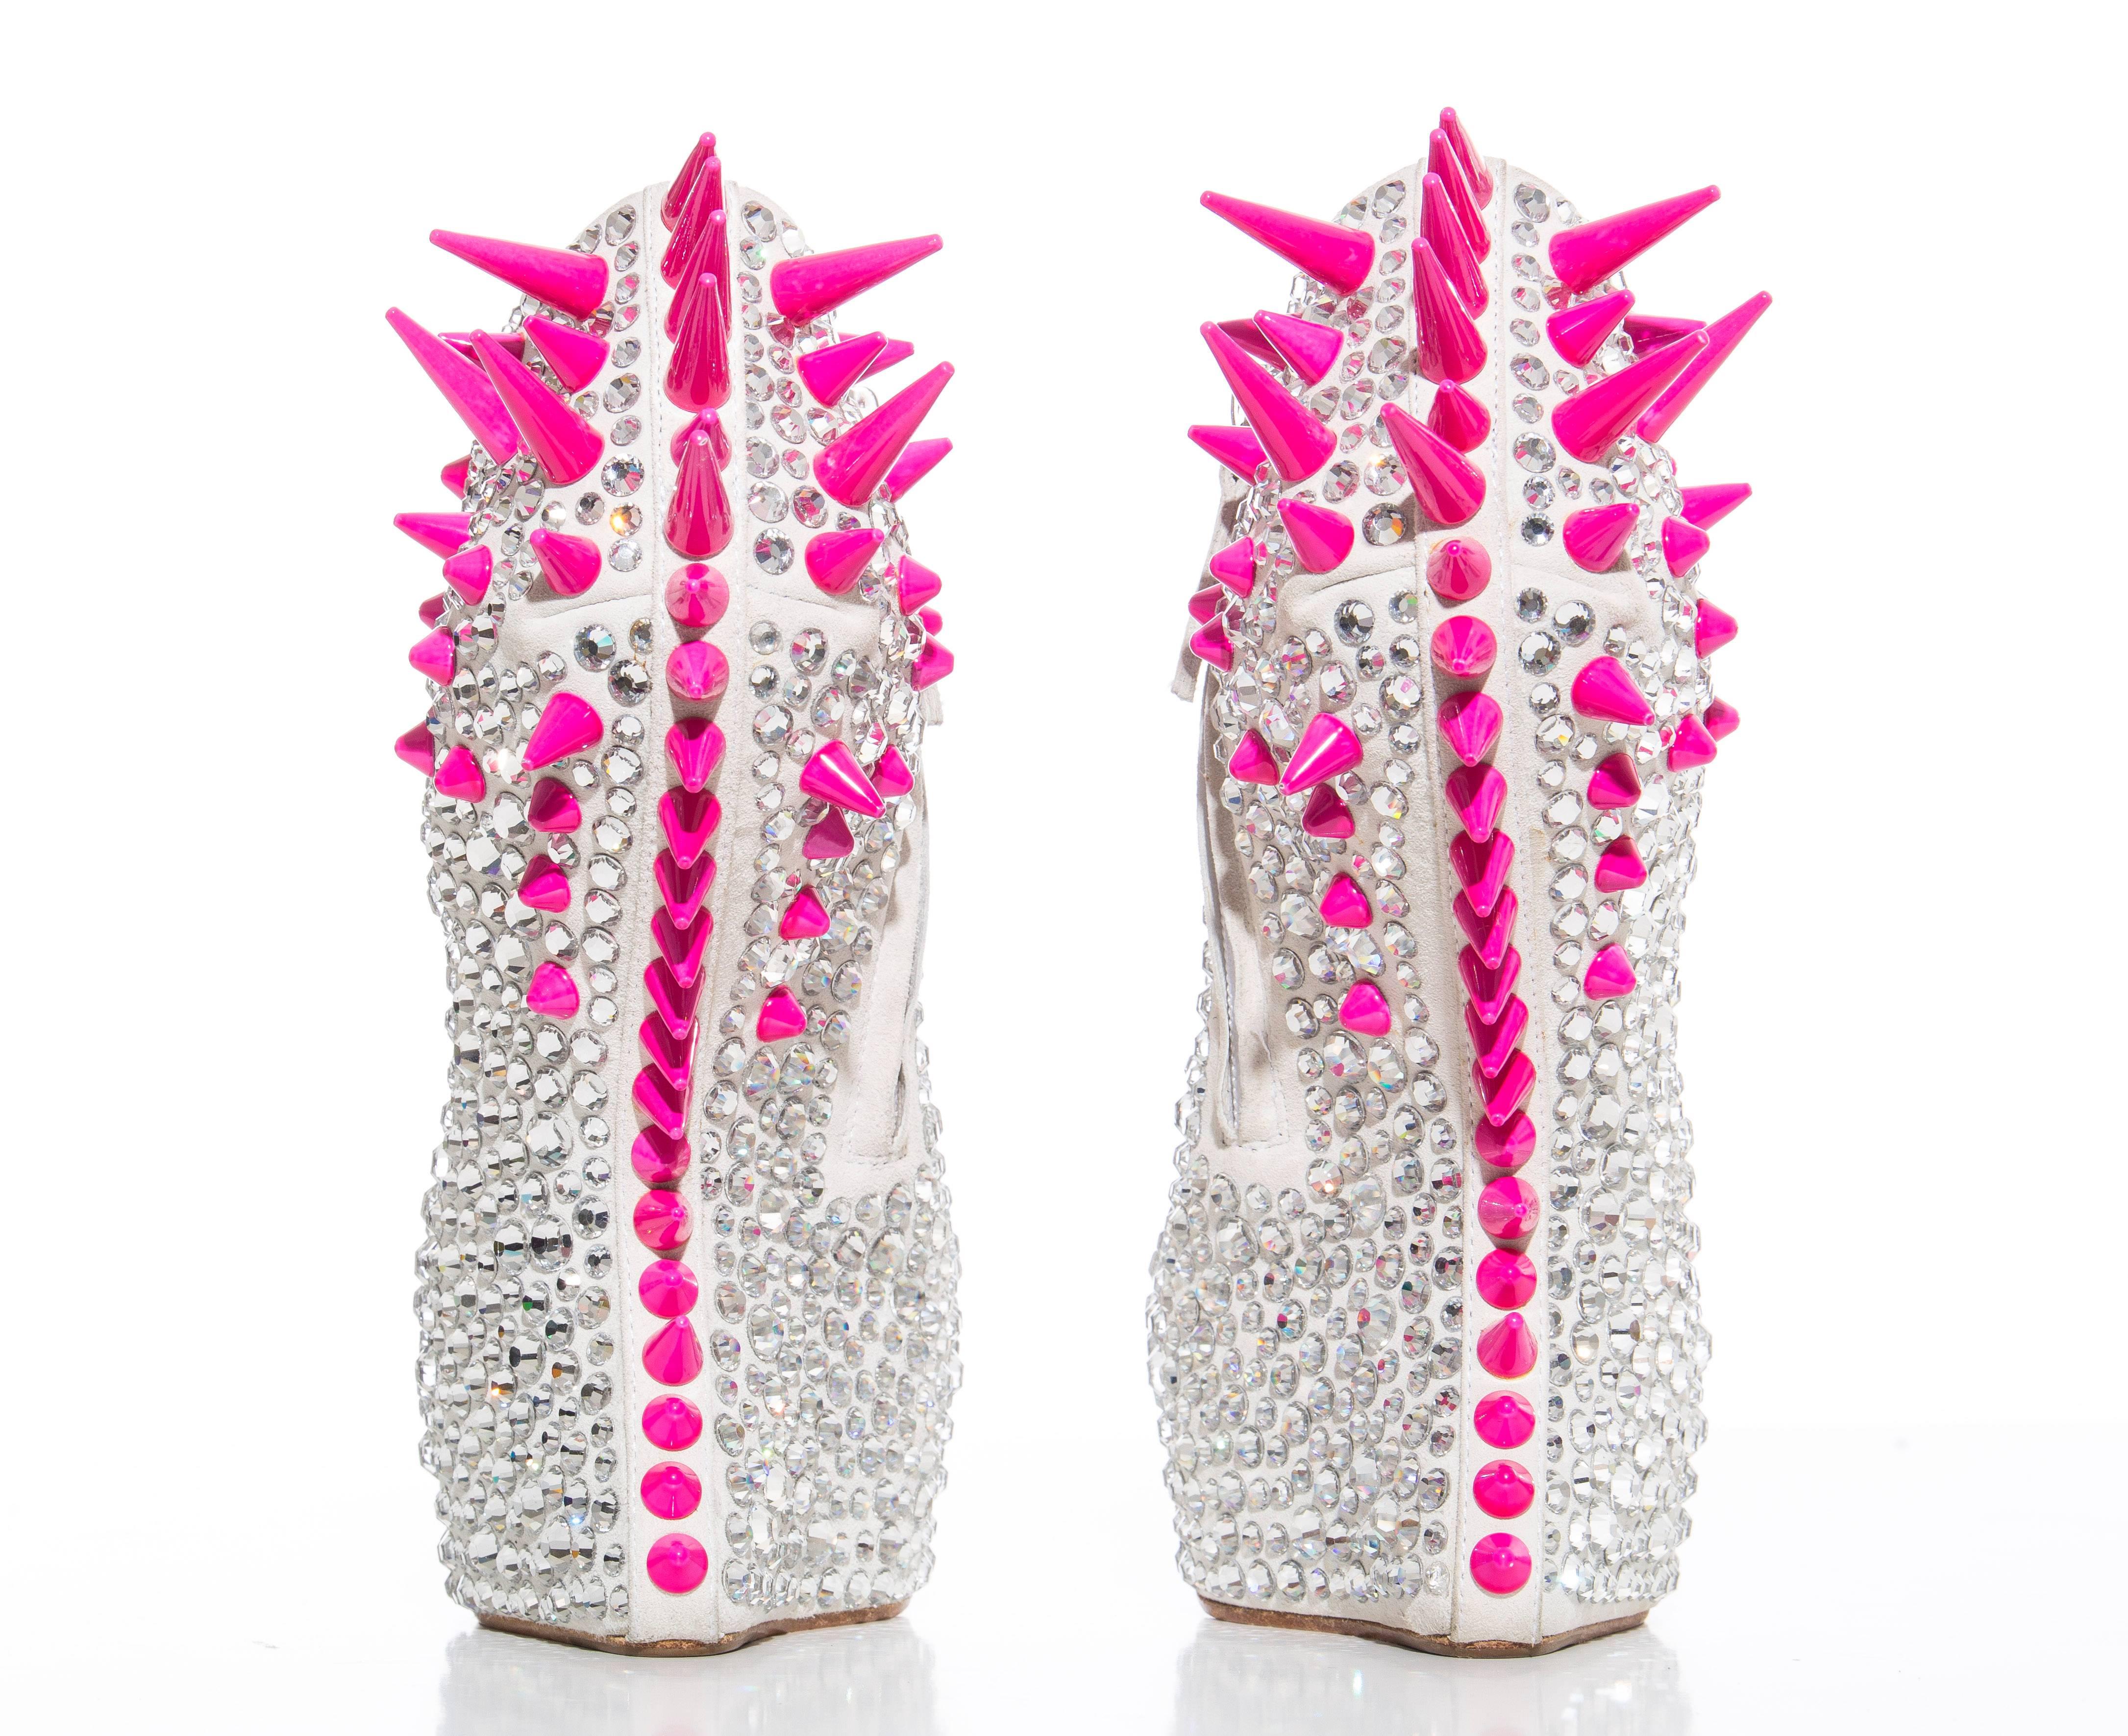 Women's Guiseppe Zanotti Swarovski Crystal & Pink Spiked-Embellished Wedges Fall 2012 For Sale